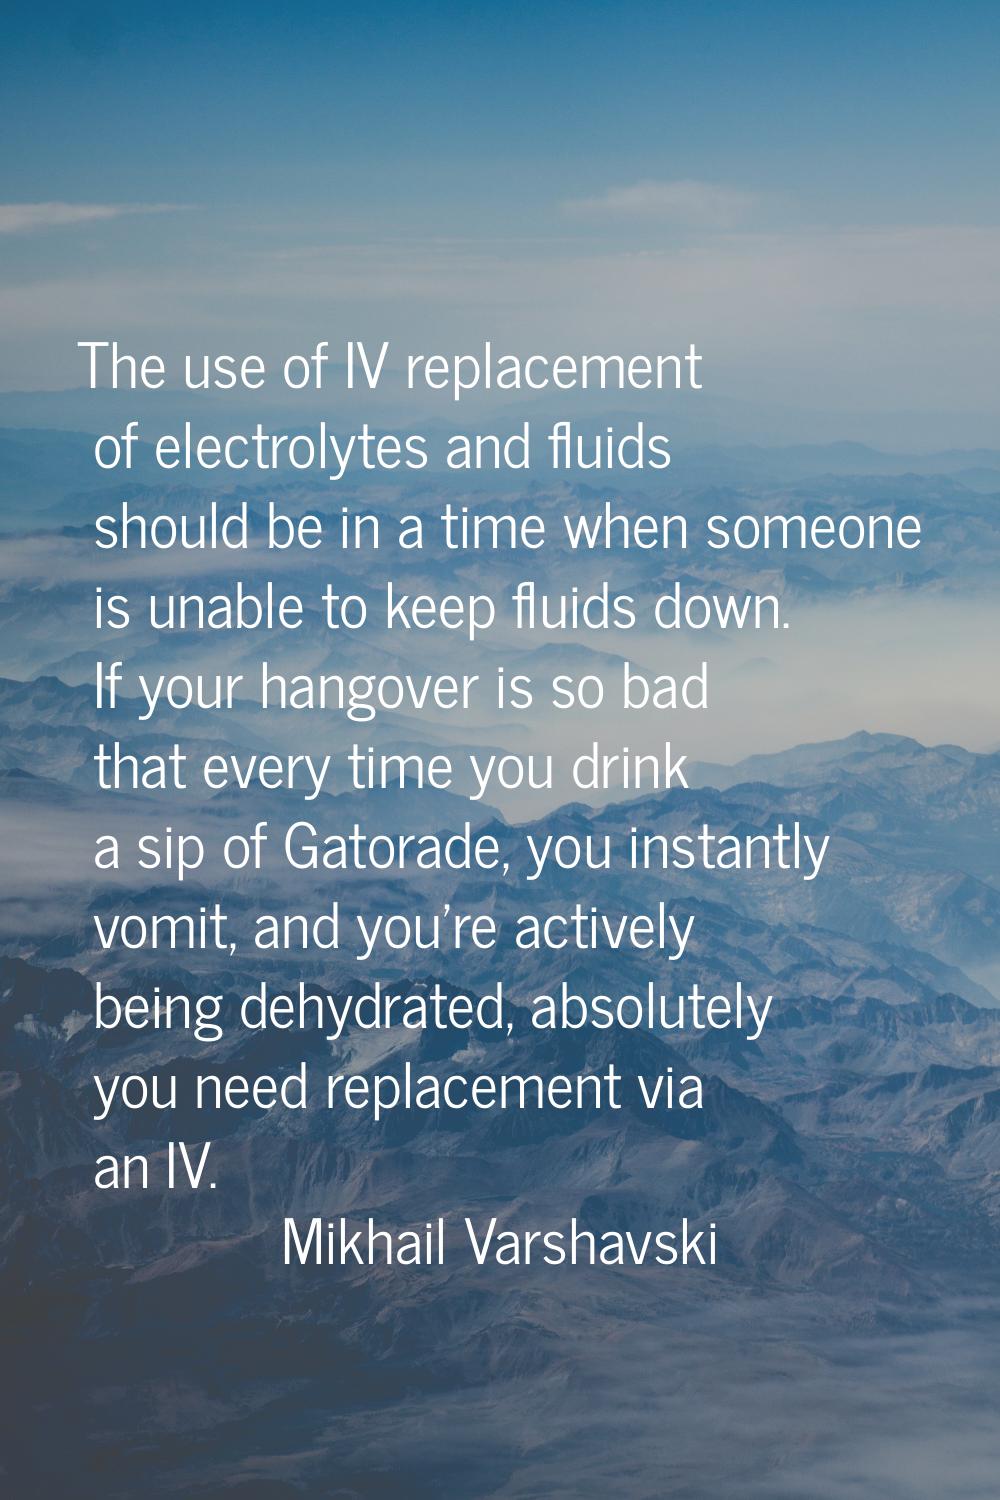 The use of IV replacement of electrolytes and fluids should be in a time when someone is unable to 